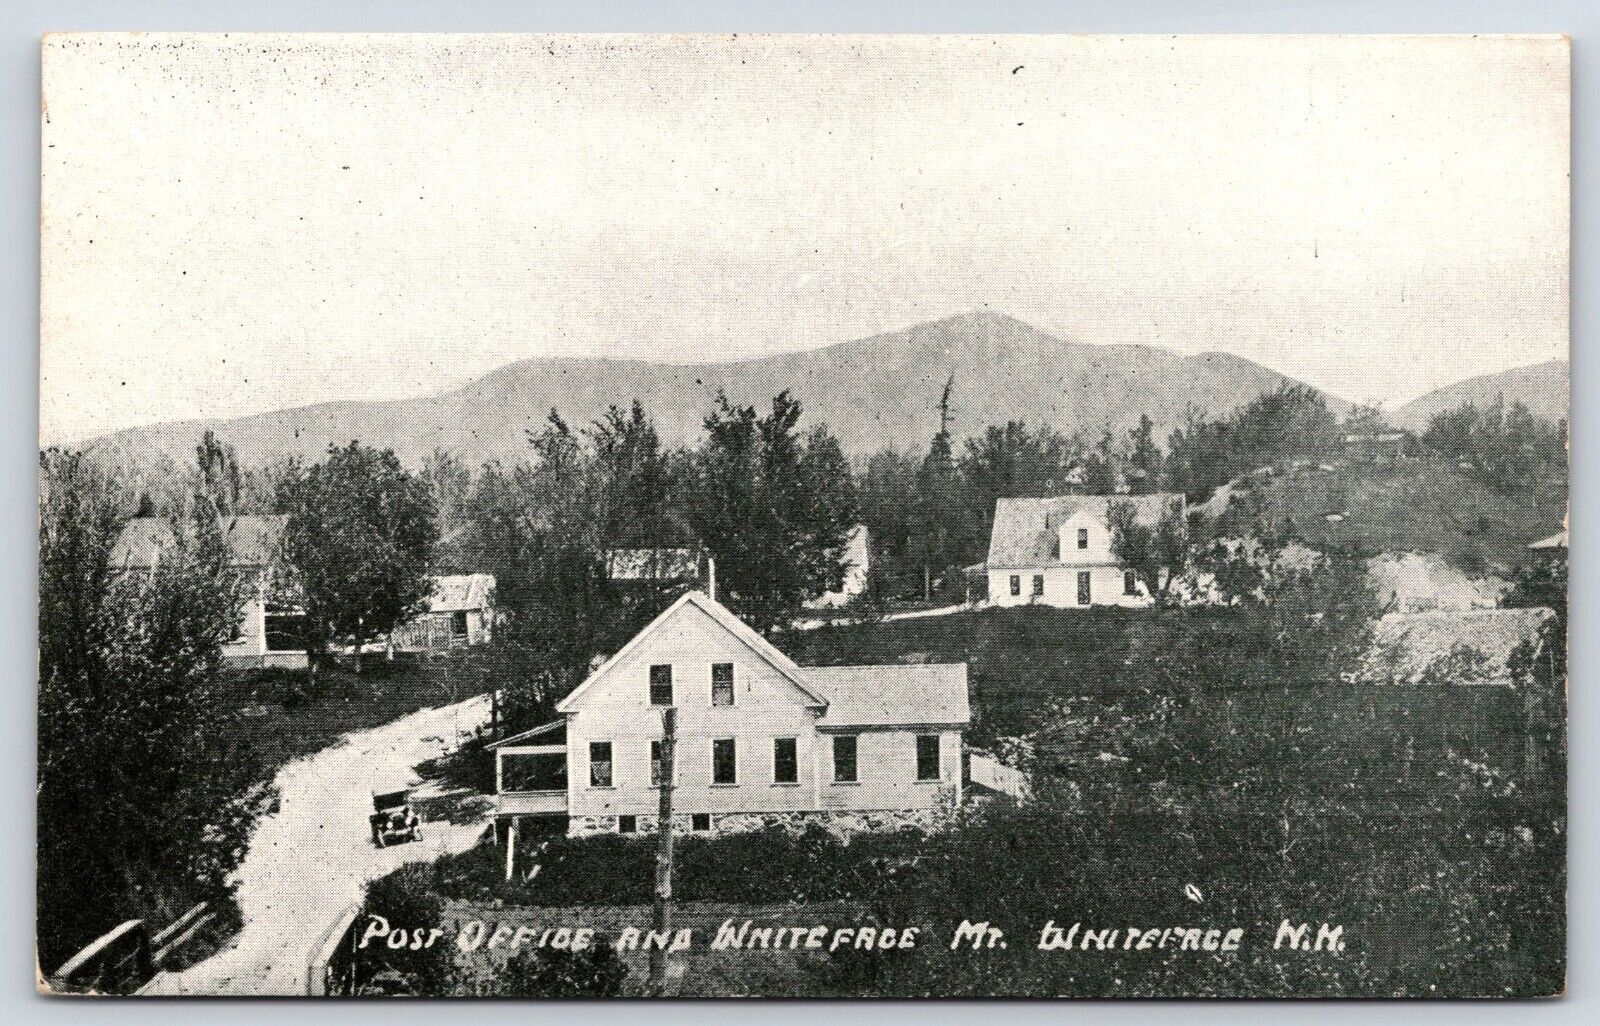 New Hampshire Mt. Whiteface Post office and Town Vintage Postcard